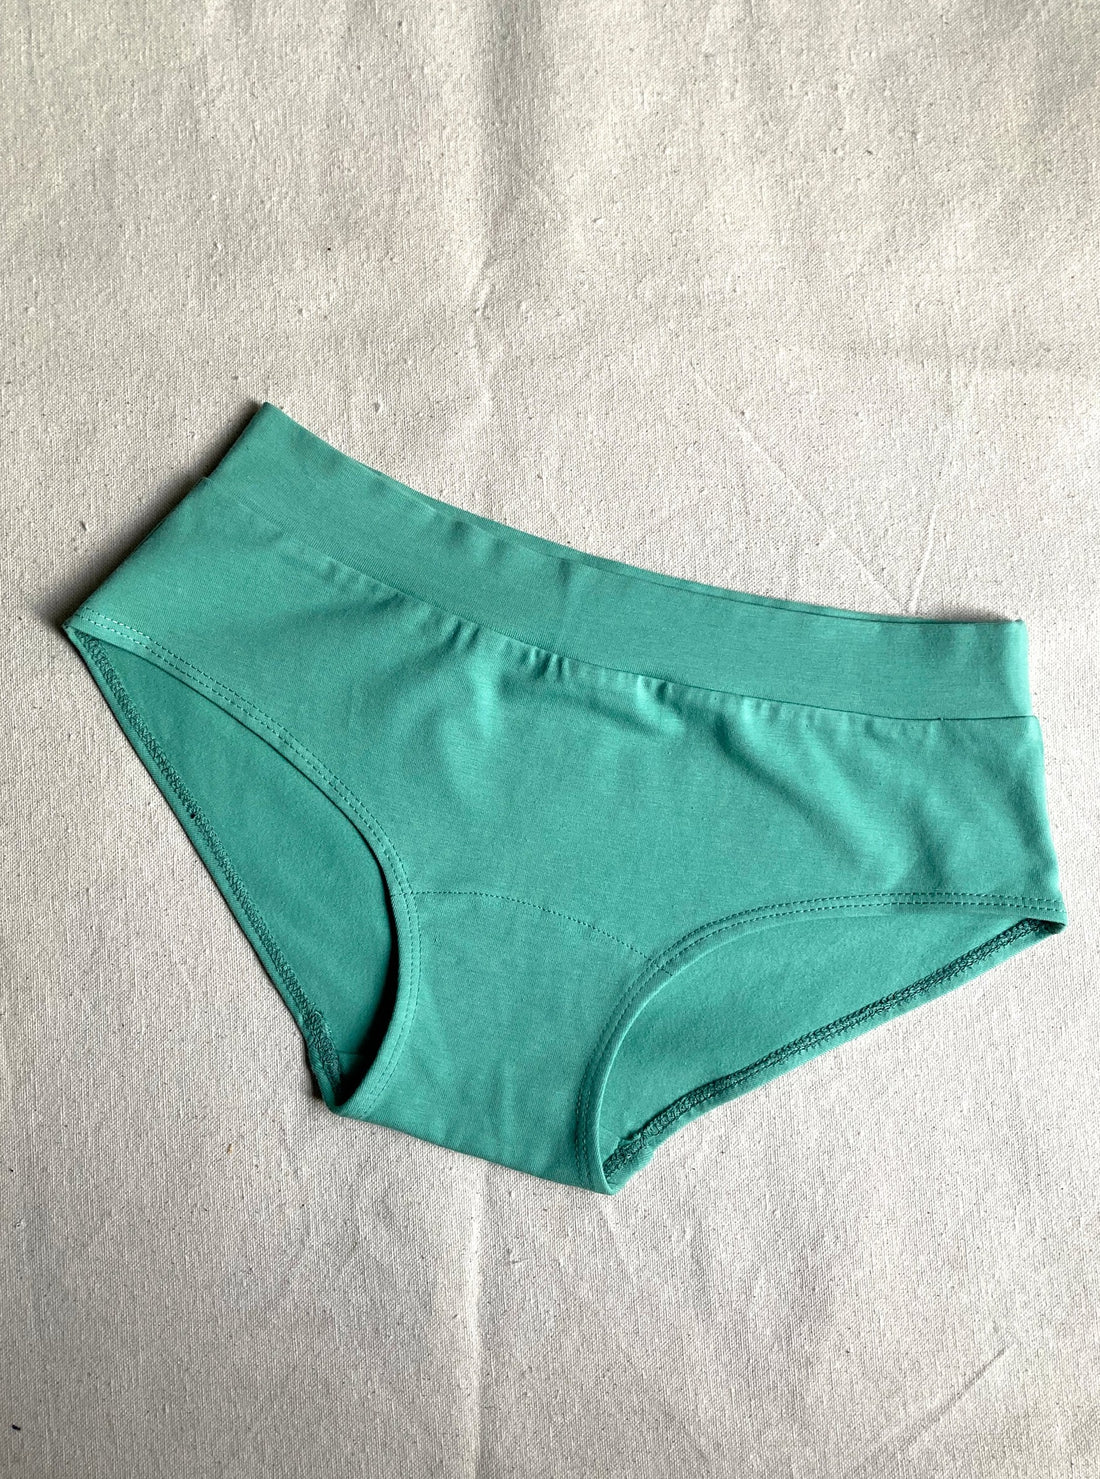 laundry underwear, laundry underwear Suppliers and Manufacturers